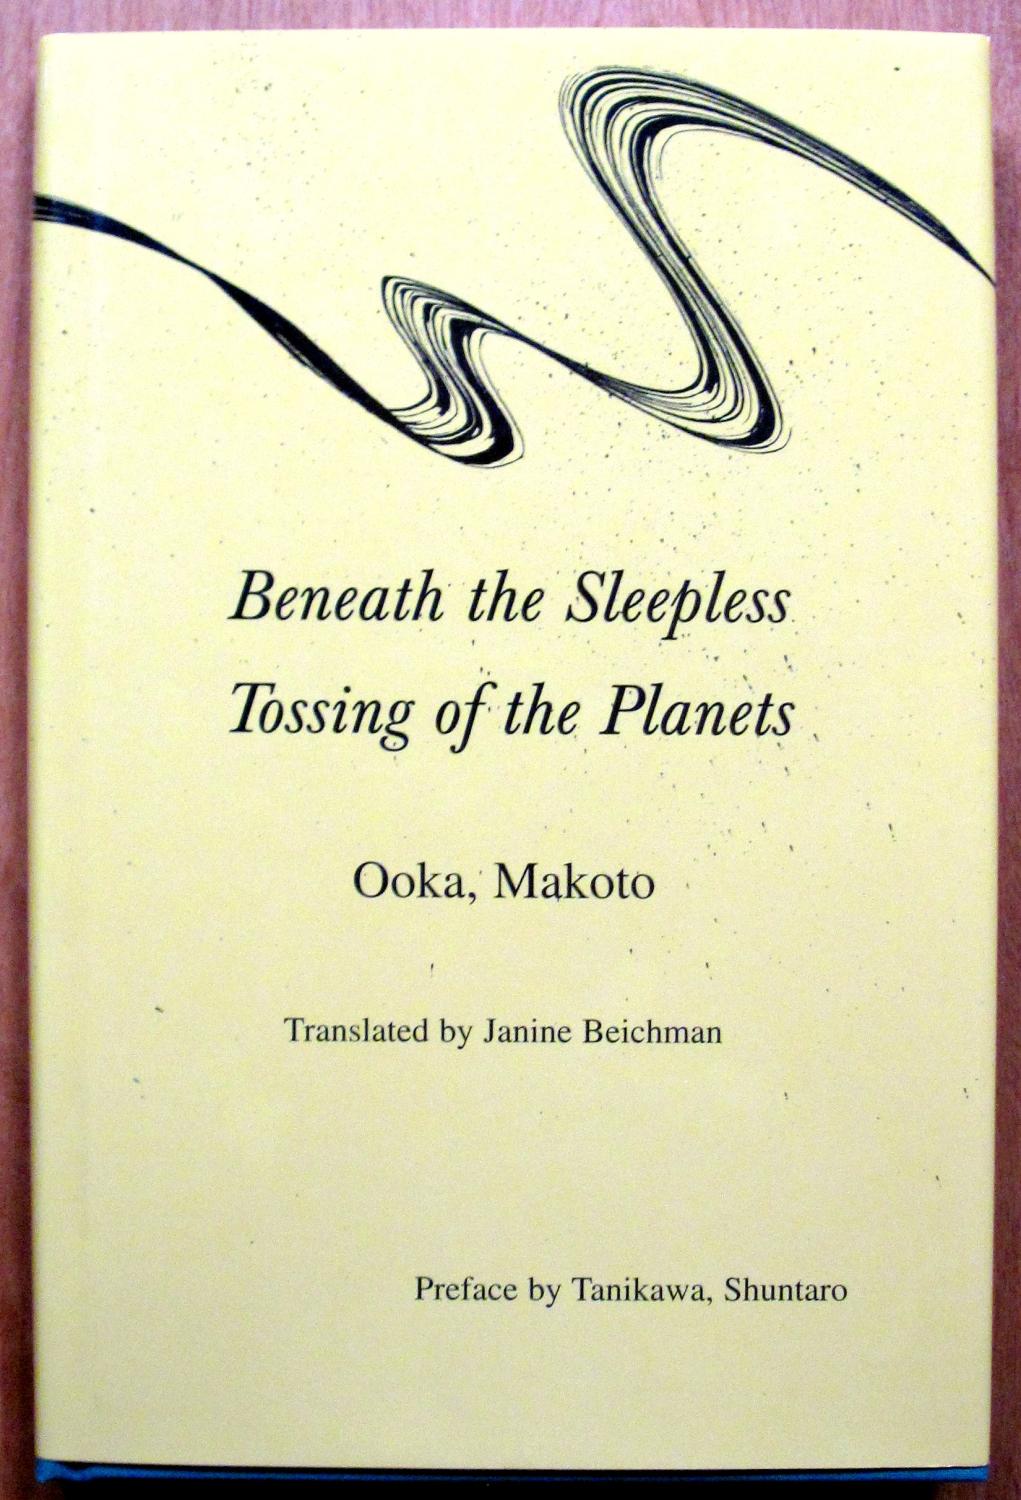 Beneath the Sleepless Tossing of the Planets. - Ooka, Makoto. Translated By Janine Beichman.